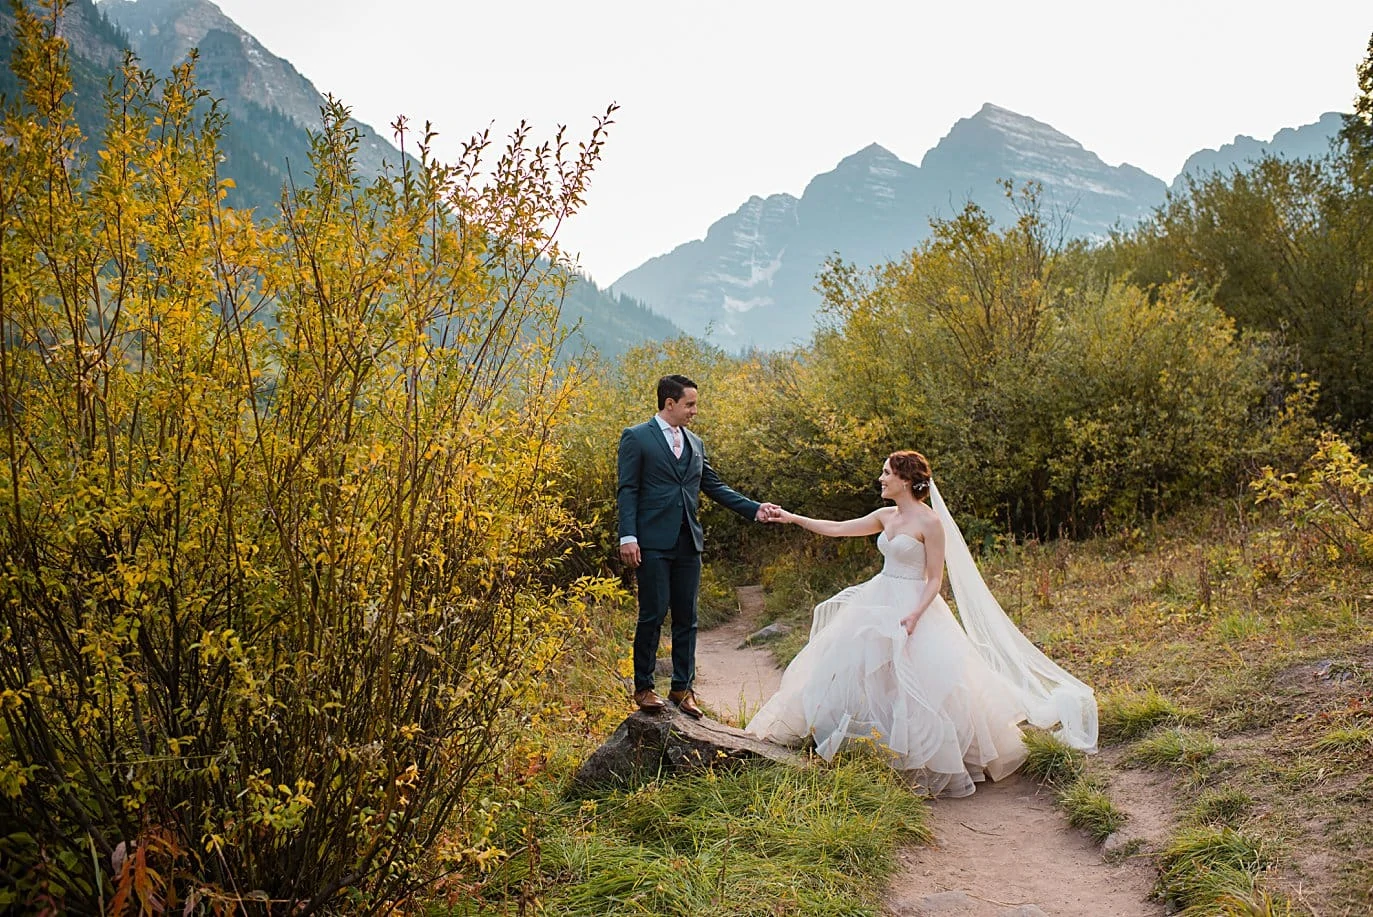 groom helps bride up on rock at fall Maroon Bells wedding by Snowmass wedding photographer Jennie Crate